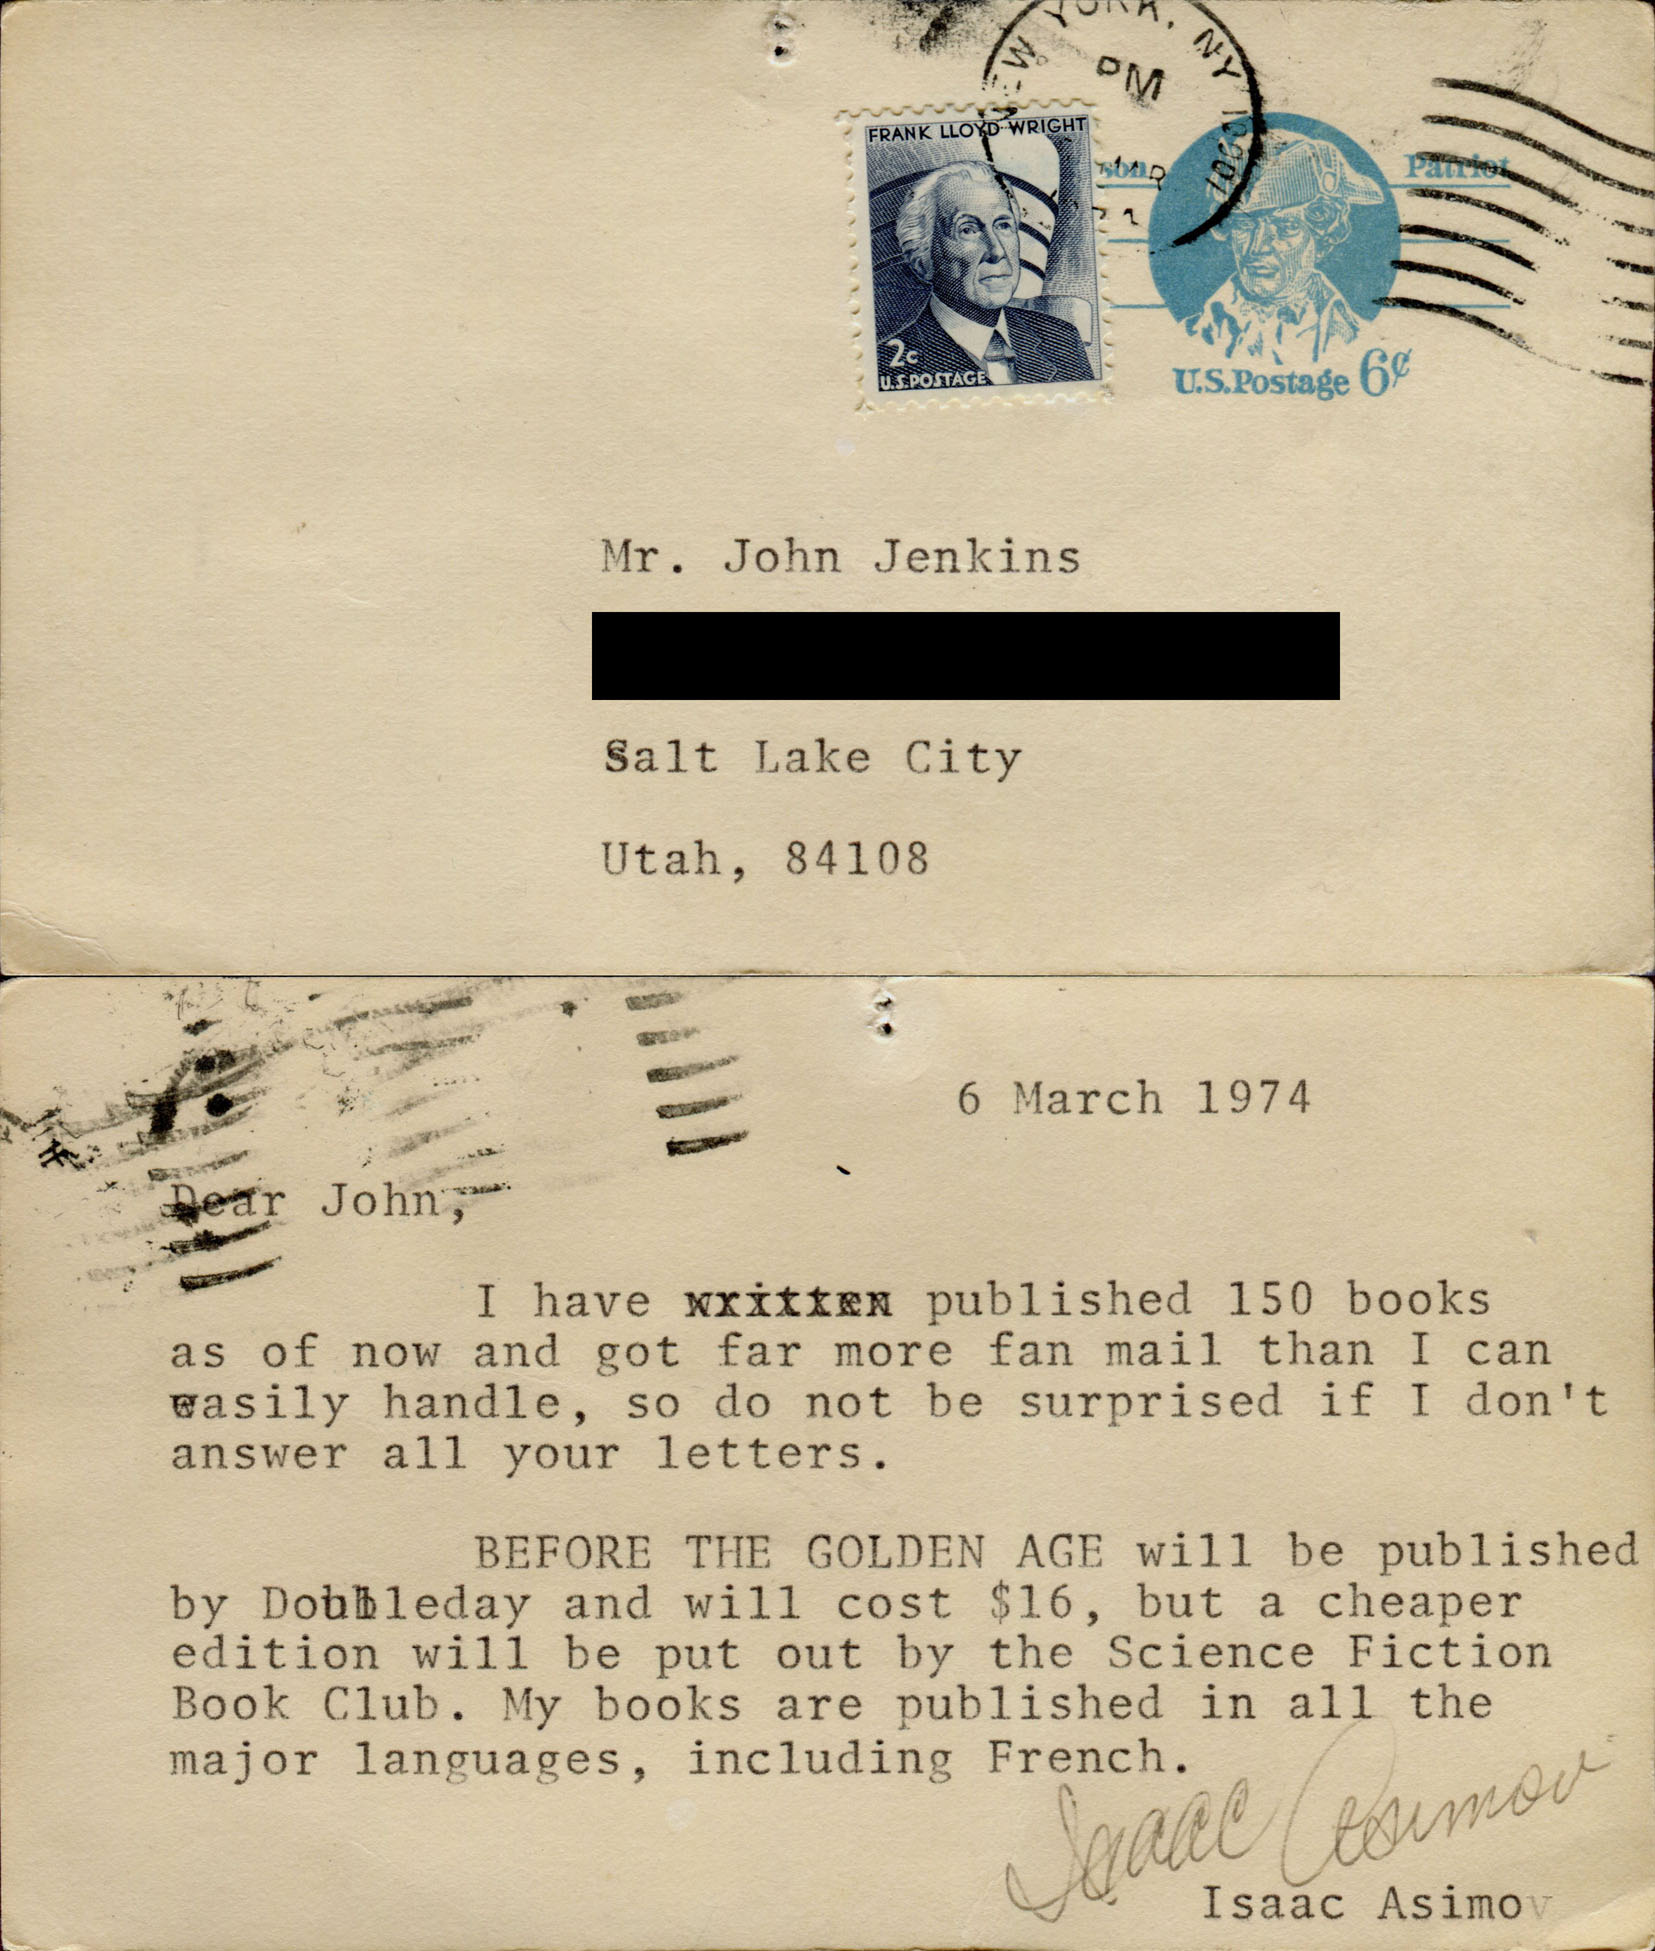 6 March 1974. Dear John, I have published 150 books as of now and got far more fan mail than I can easily handle, so do not be surprised if I don't answer all your letters. BEFORE THE GOLDEN AGE will be published by Doubleday and will cost $16, but a cheaper edition will be put out by the Science Fiction Book Club. My books are published in all the major languages, including French. Isaac Asimov